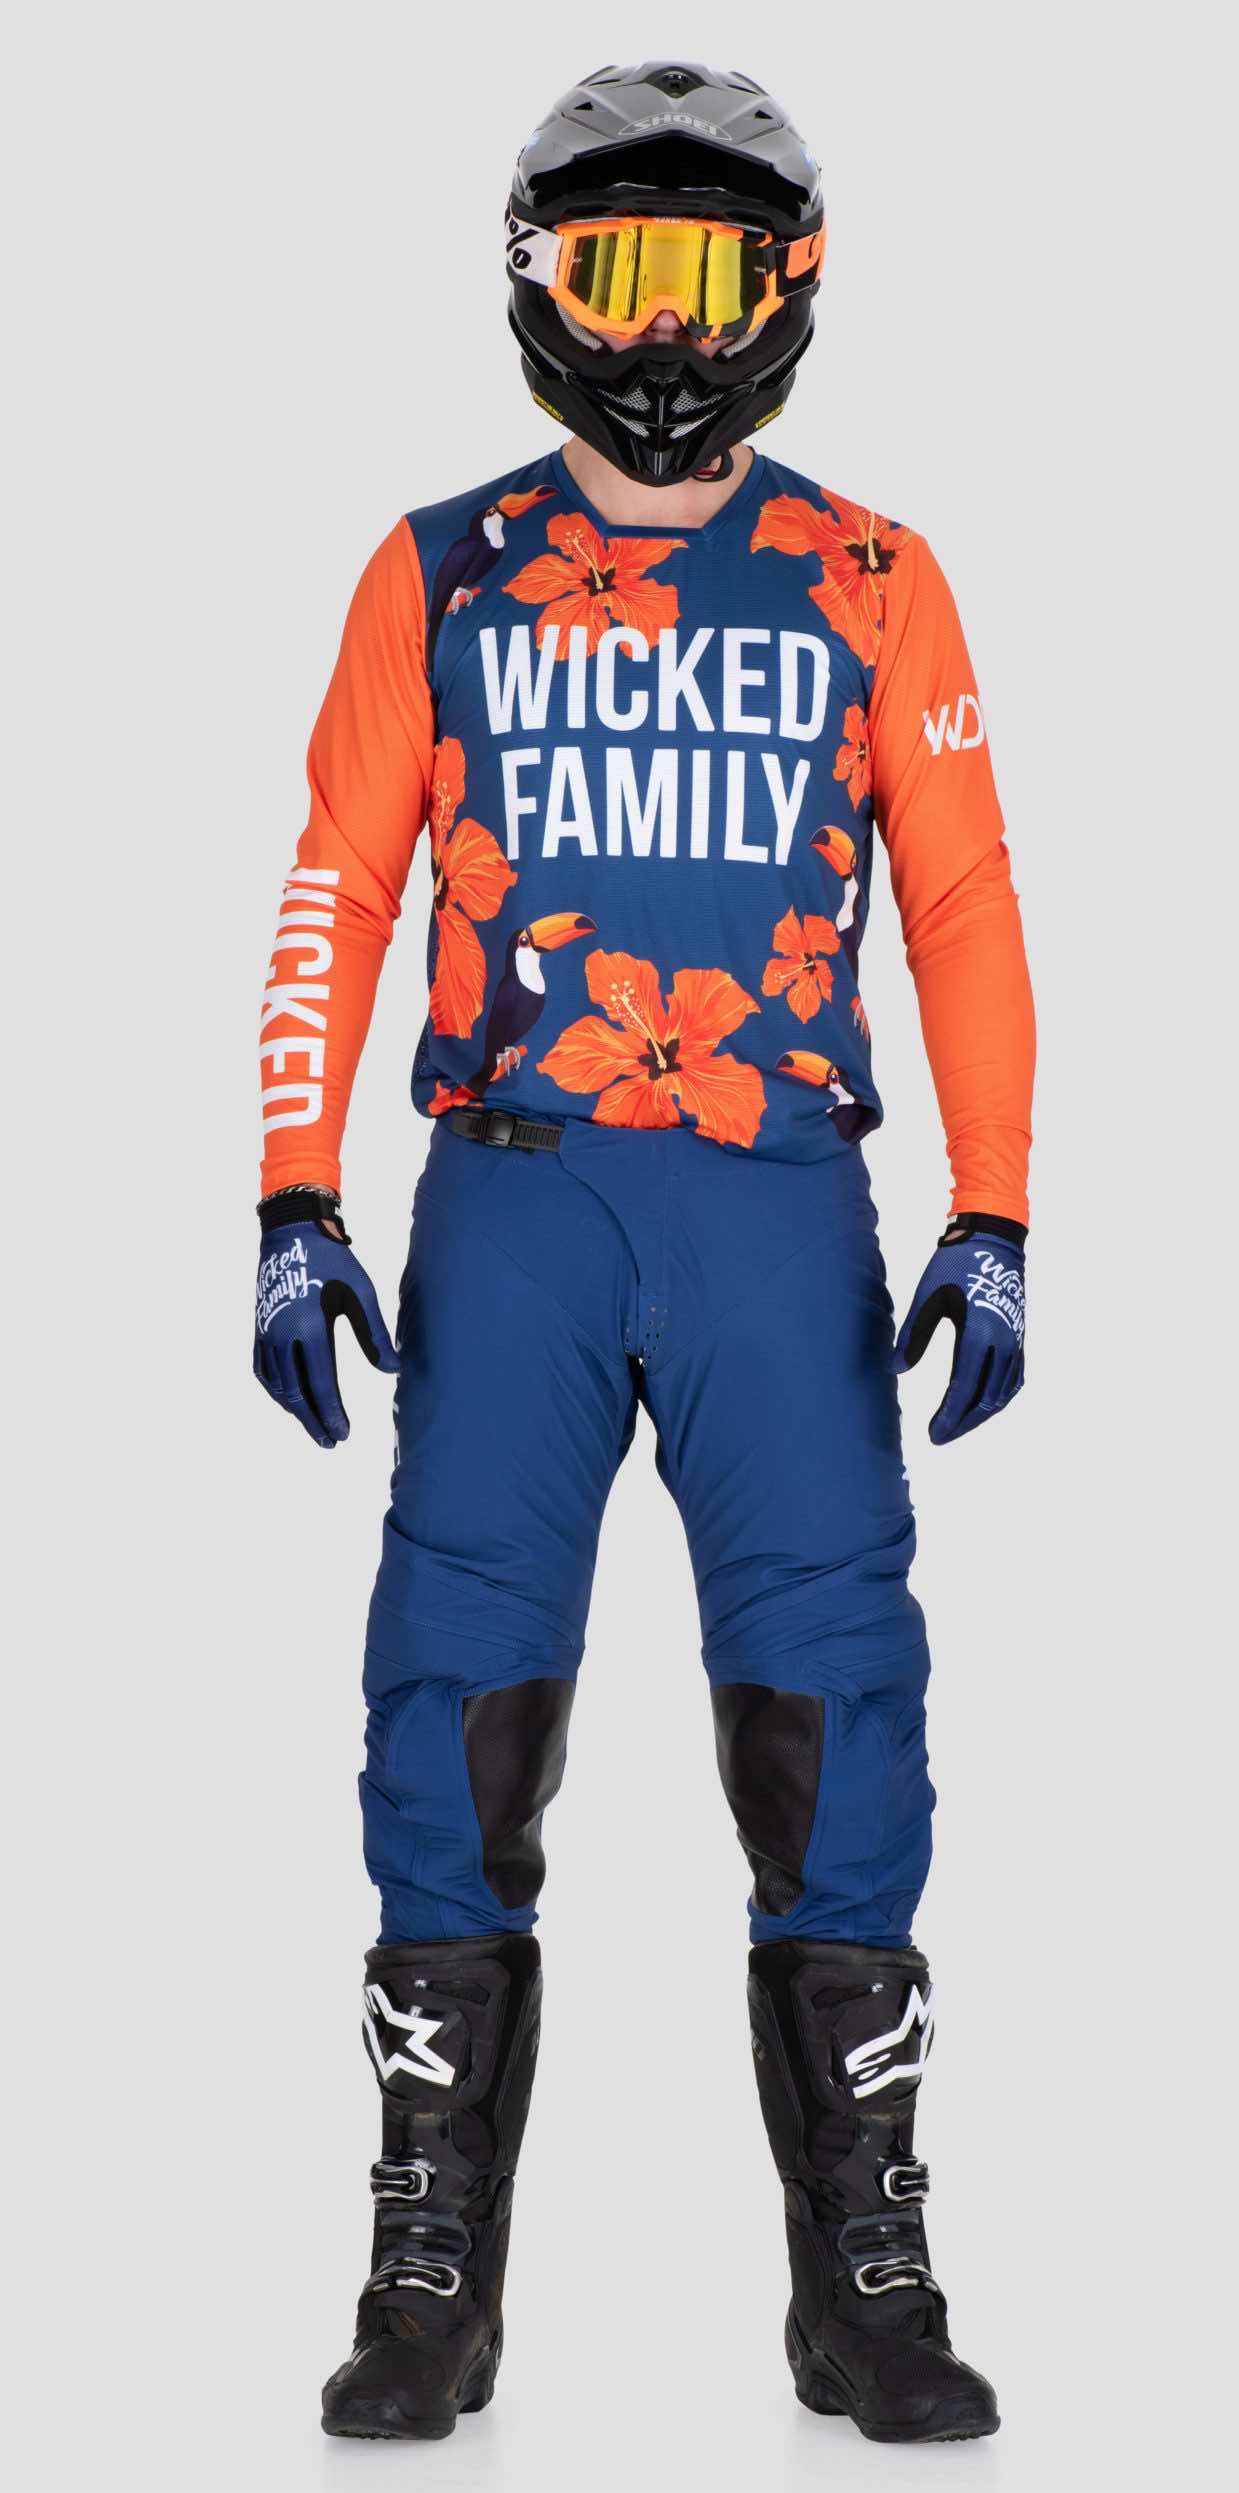 Styleguide for endless MX Gear Combos - Create your own wicked style!